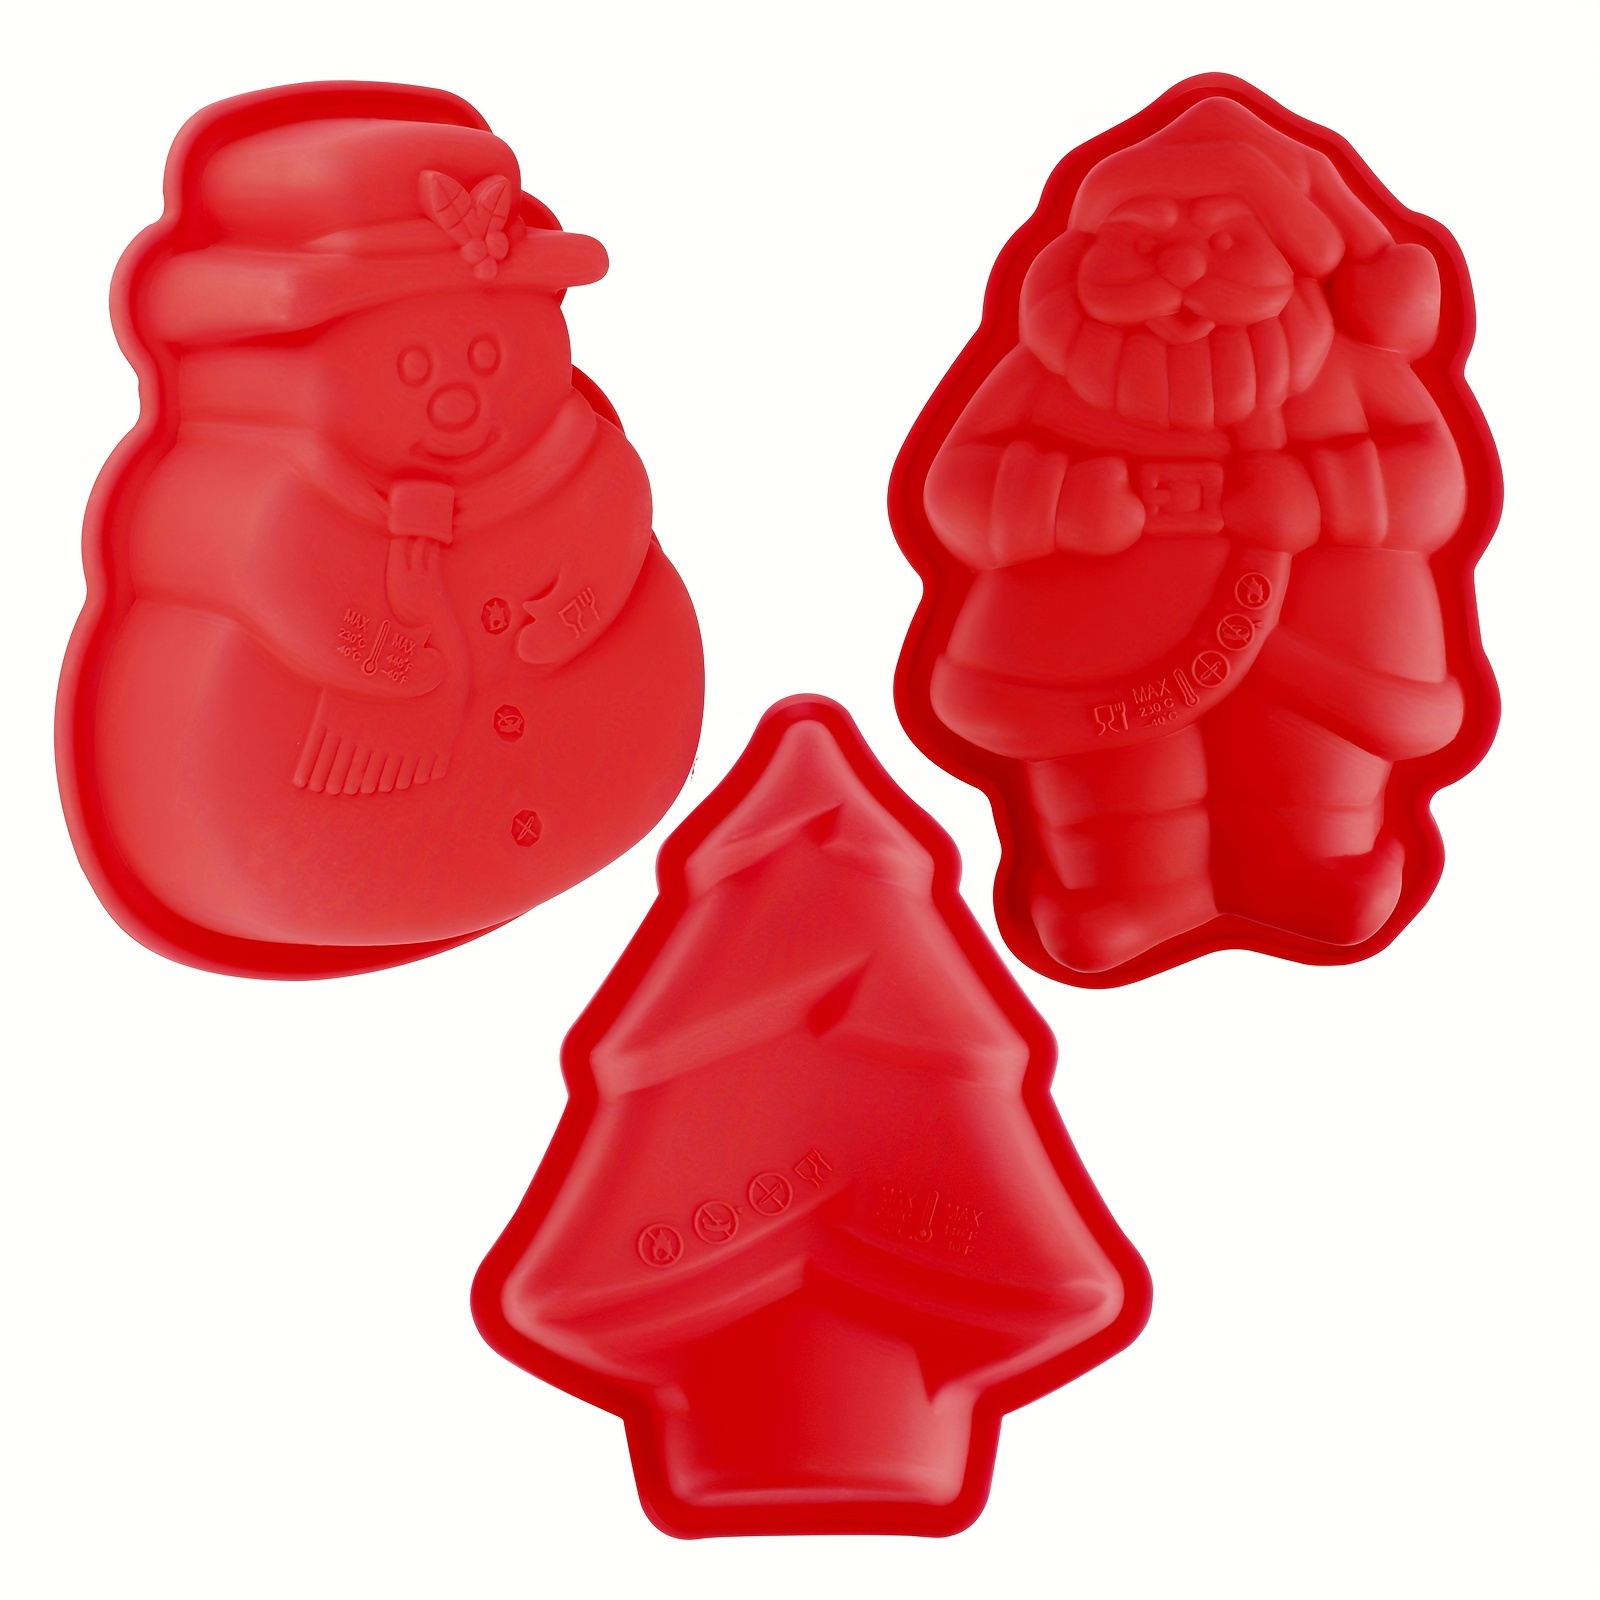 3 Pack Christmas Silicone Molds, Large Size Xmas Baking Mold for Mini  Cakes, Handmade Soap, Chocolate, Jello, Candy and Candles,With Christmas  Tree